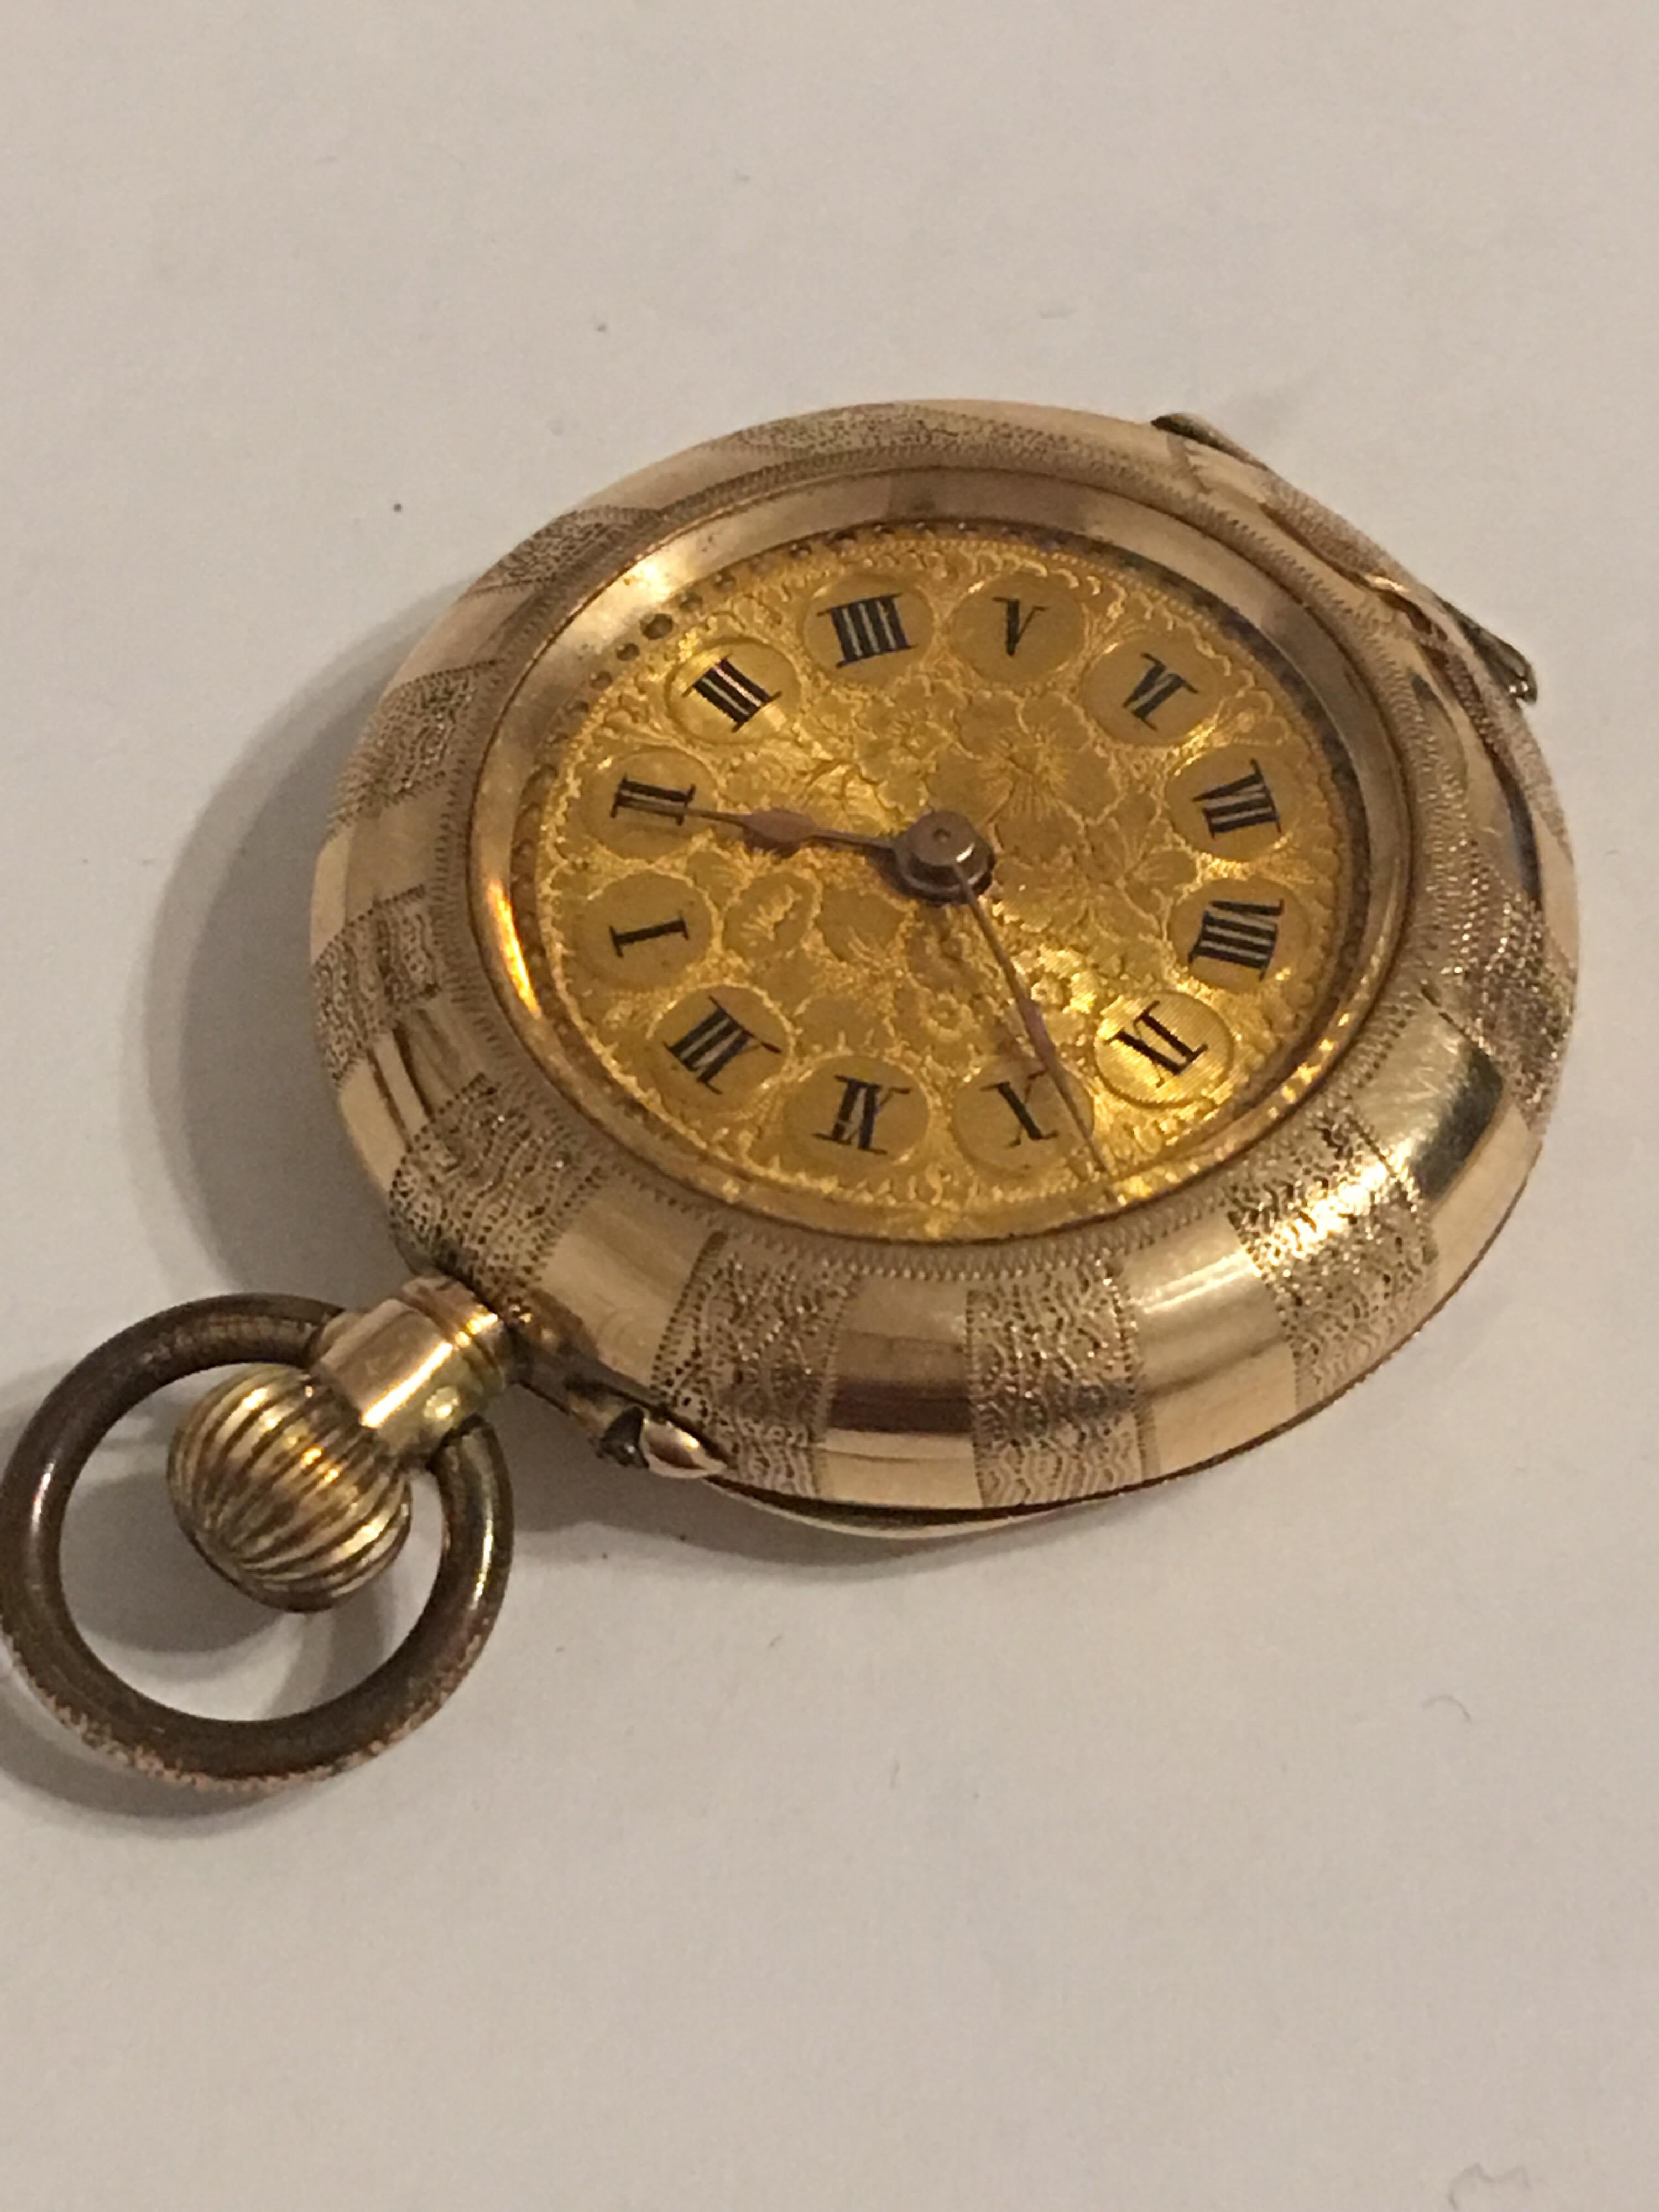 This beautiful fully Engraved Case small 31mm pocket watch is working and ticking well . the metal ring or Loop is tarnished. It weigh 24.6grams